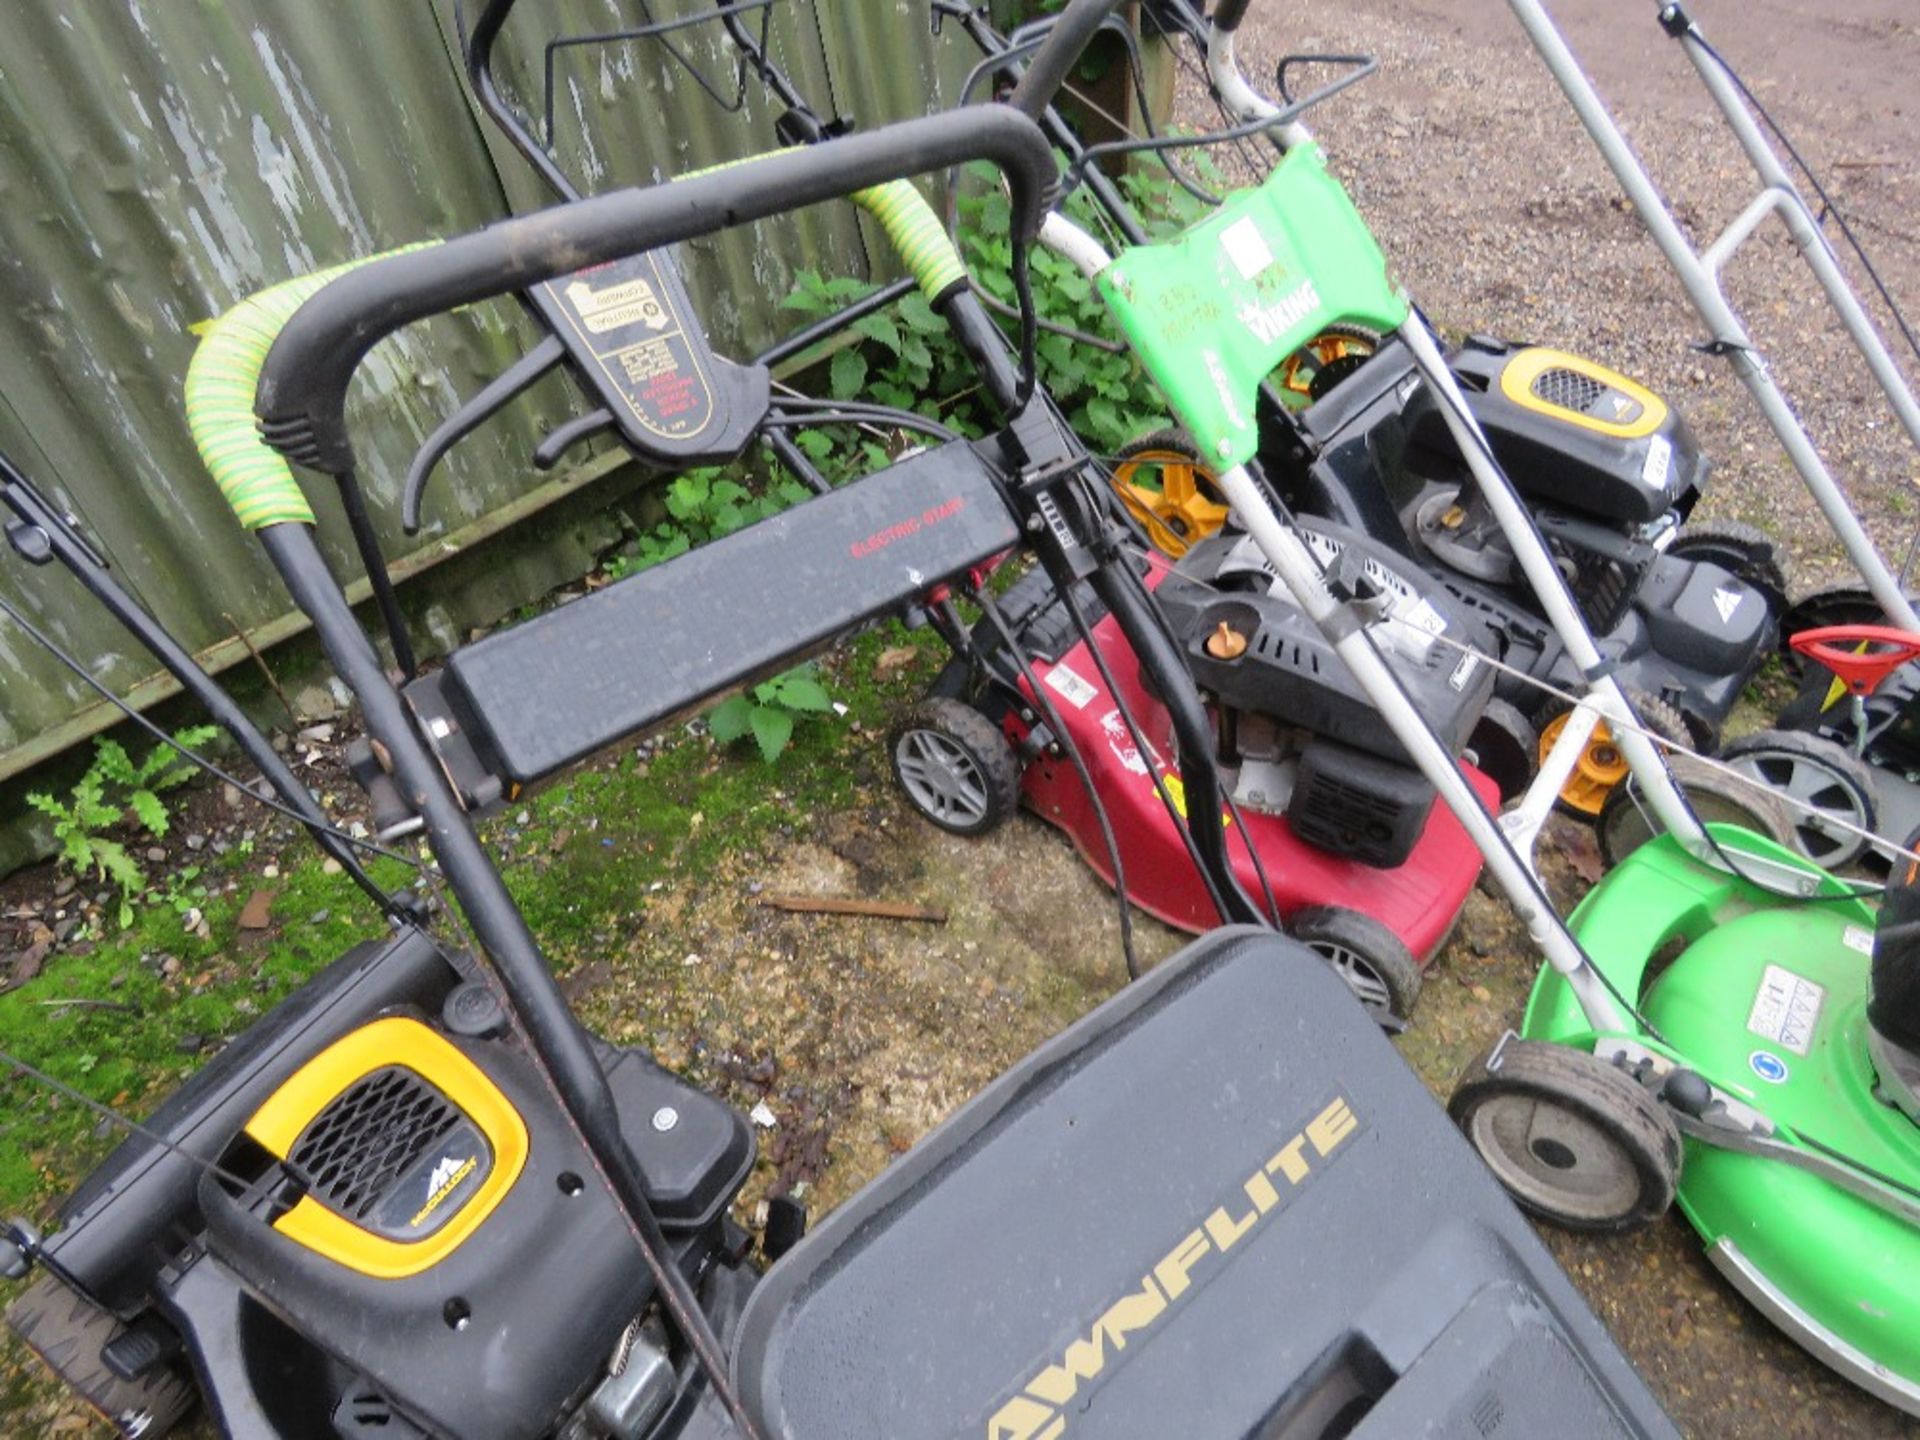 LAWNFLITE ROLLER PETROL ENGINED ROTARY LAWNMOWER. WITH COLLECTOR. THIS LOT IS SOLD UNDER THE AUC - Image 3 of 4